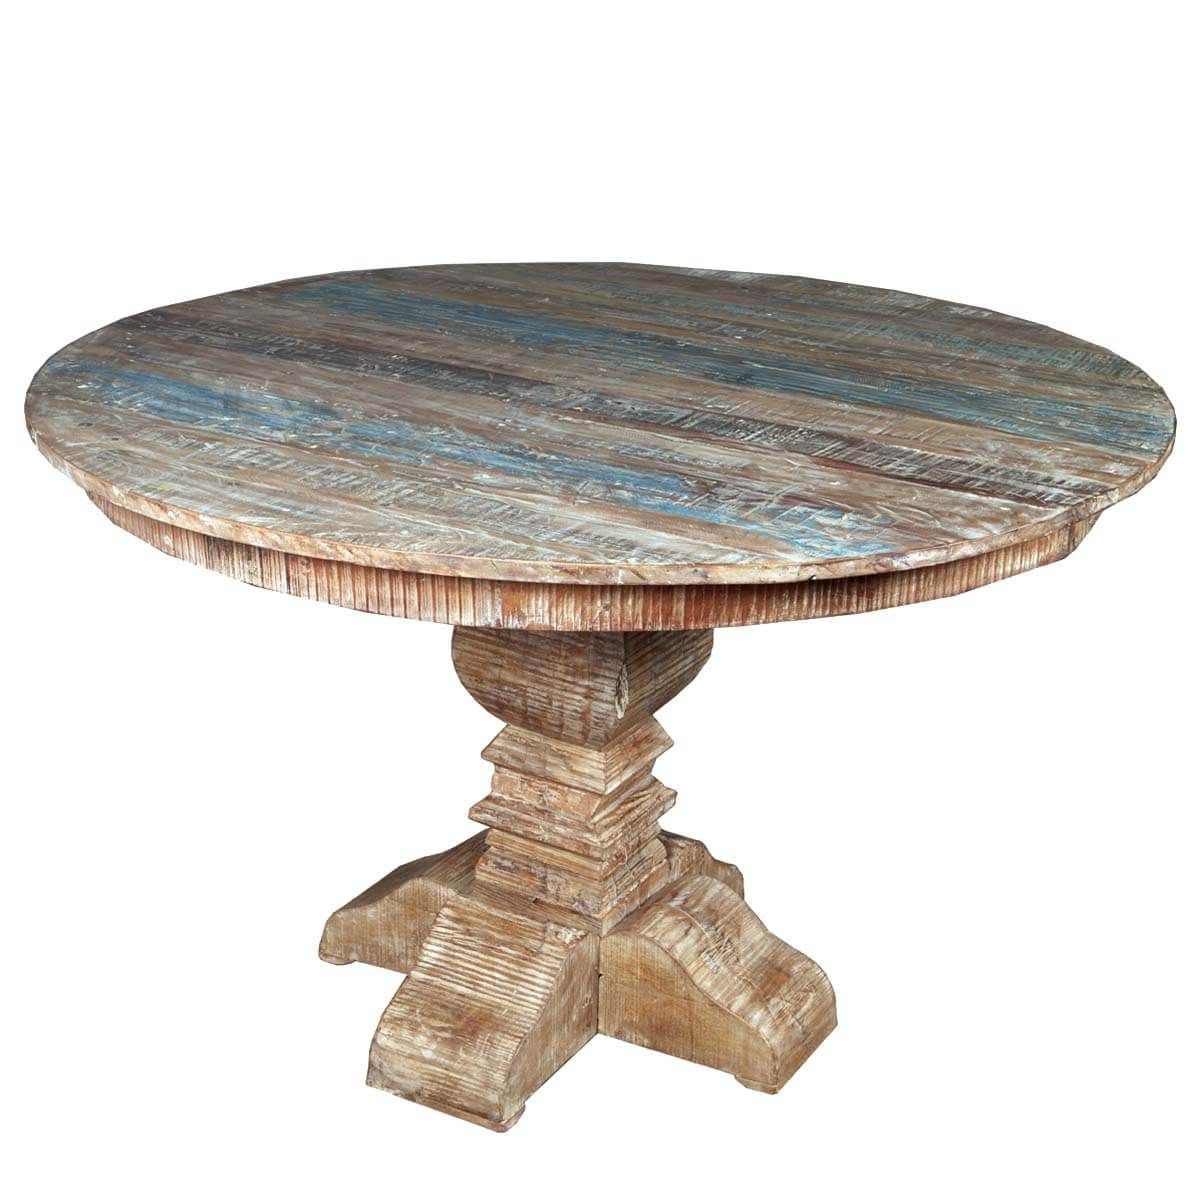 Rustic Round Outdoor Tables With Favorite French Quarter Rustic Reclaimed Wood Round Dining Table (View 6 of 15)